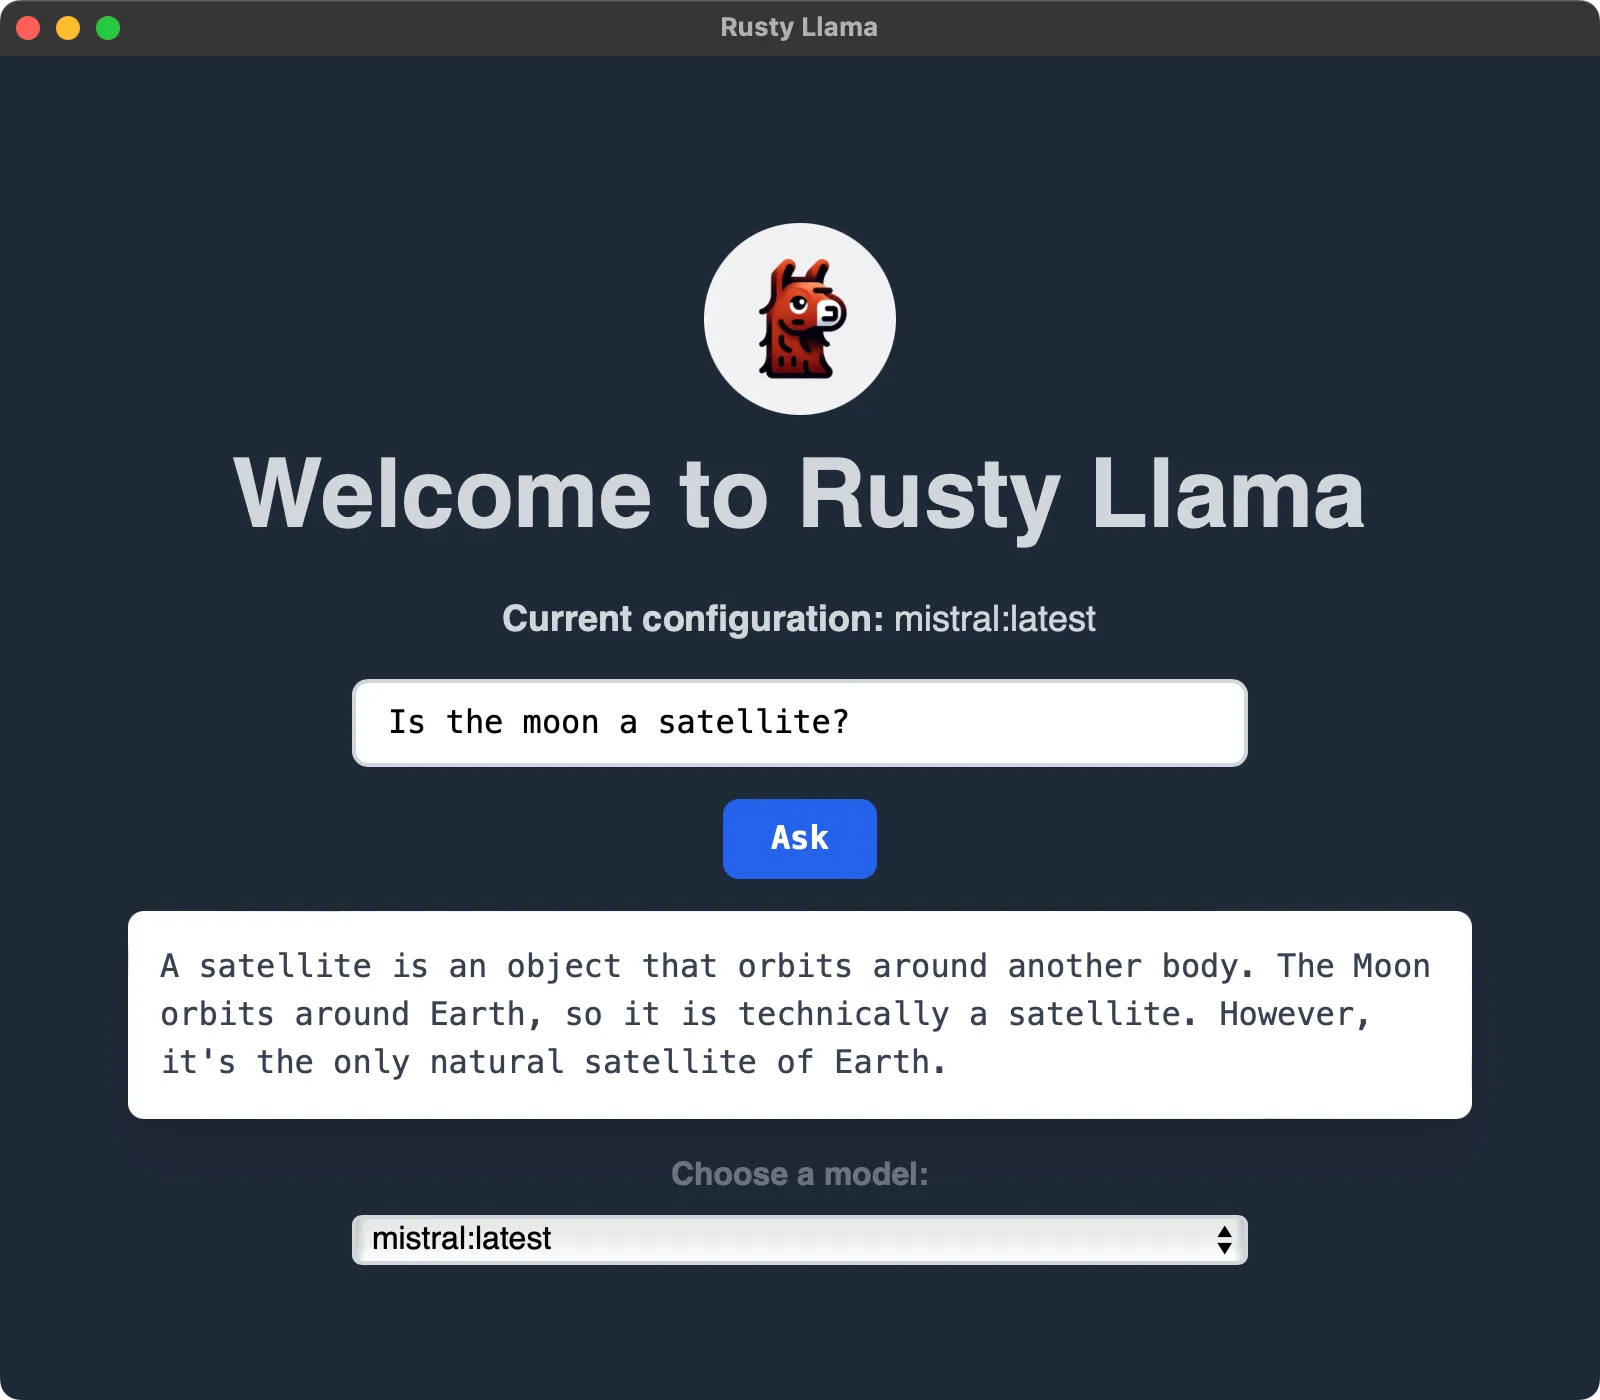 Basic Preview Version of Rusty Llama